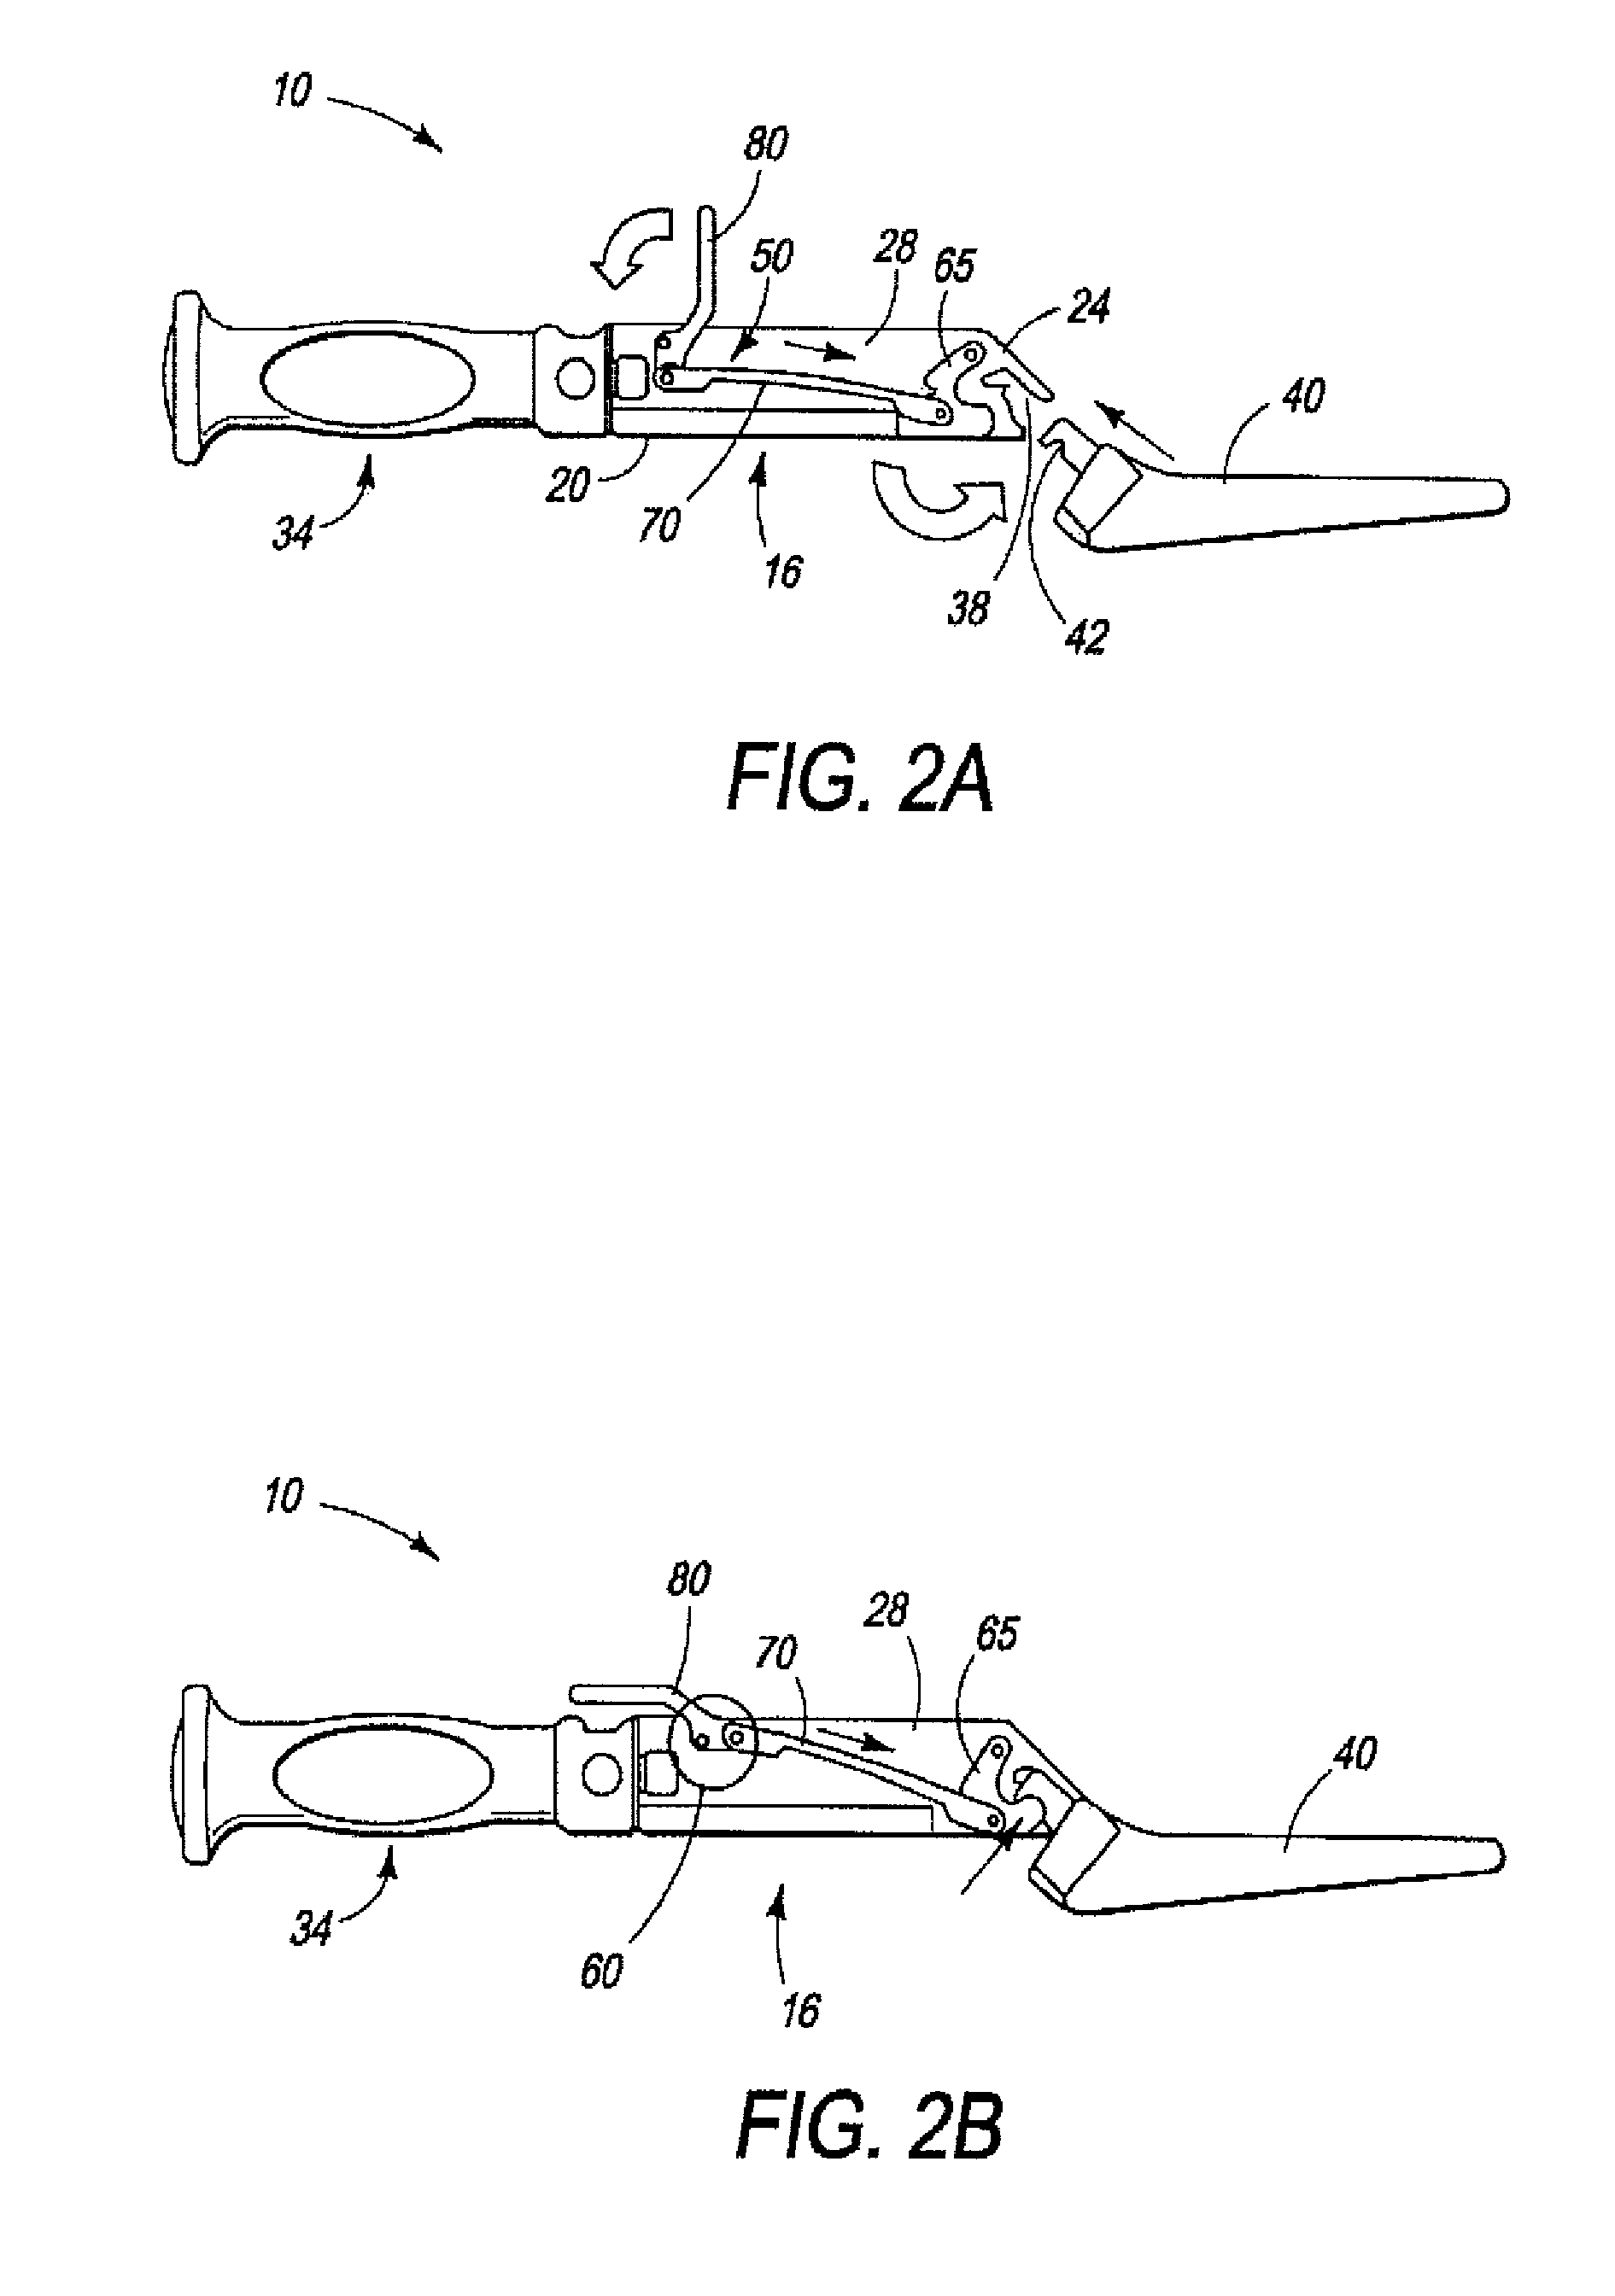 Surgical tool holder for facilitated sterilization